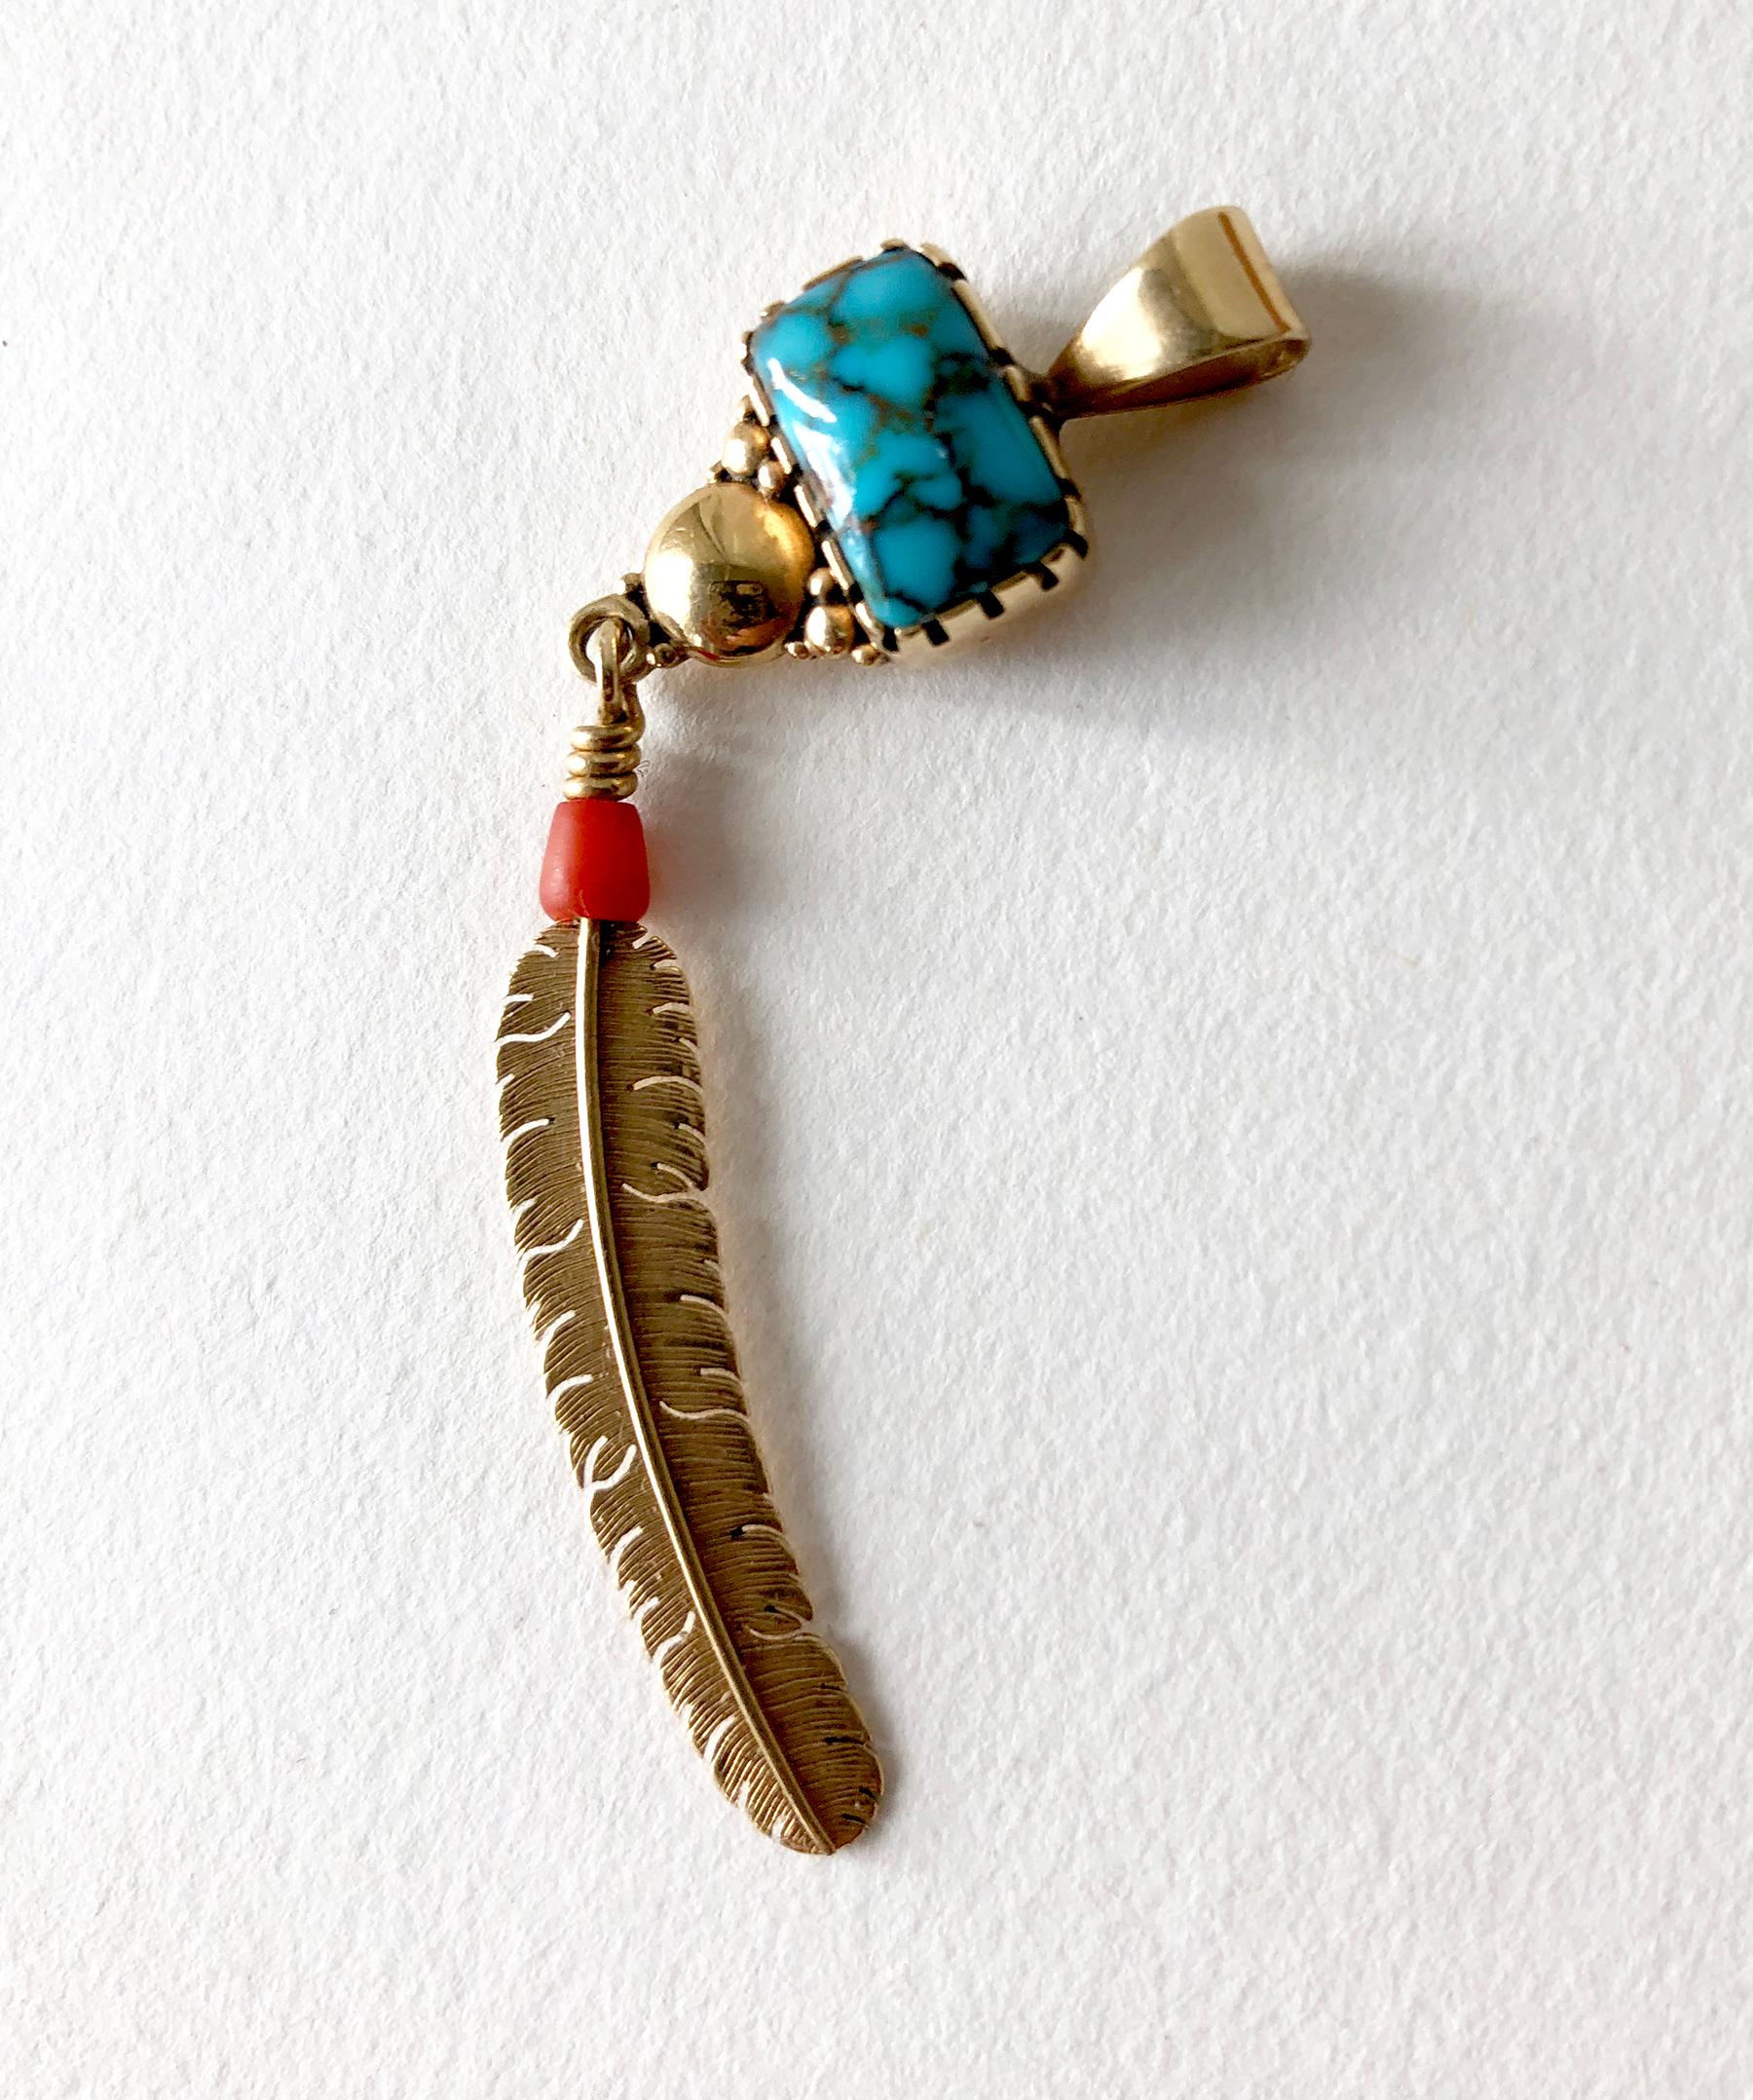 14K gold, turquoise and coral Eagle feather pendant created by Navajo jeweler, Boyd Tsosie.  Pendant measures 2 5/8